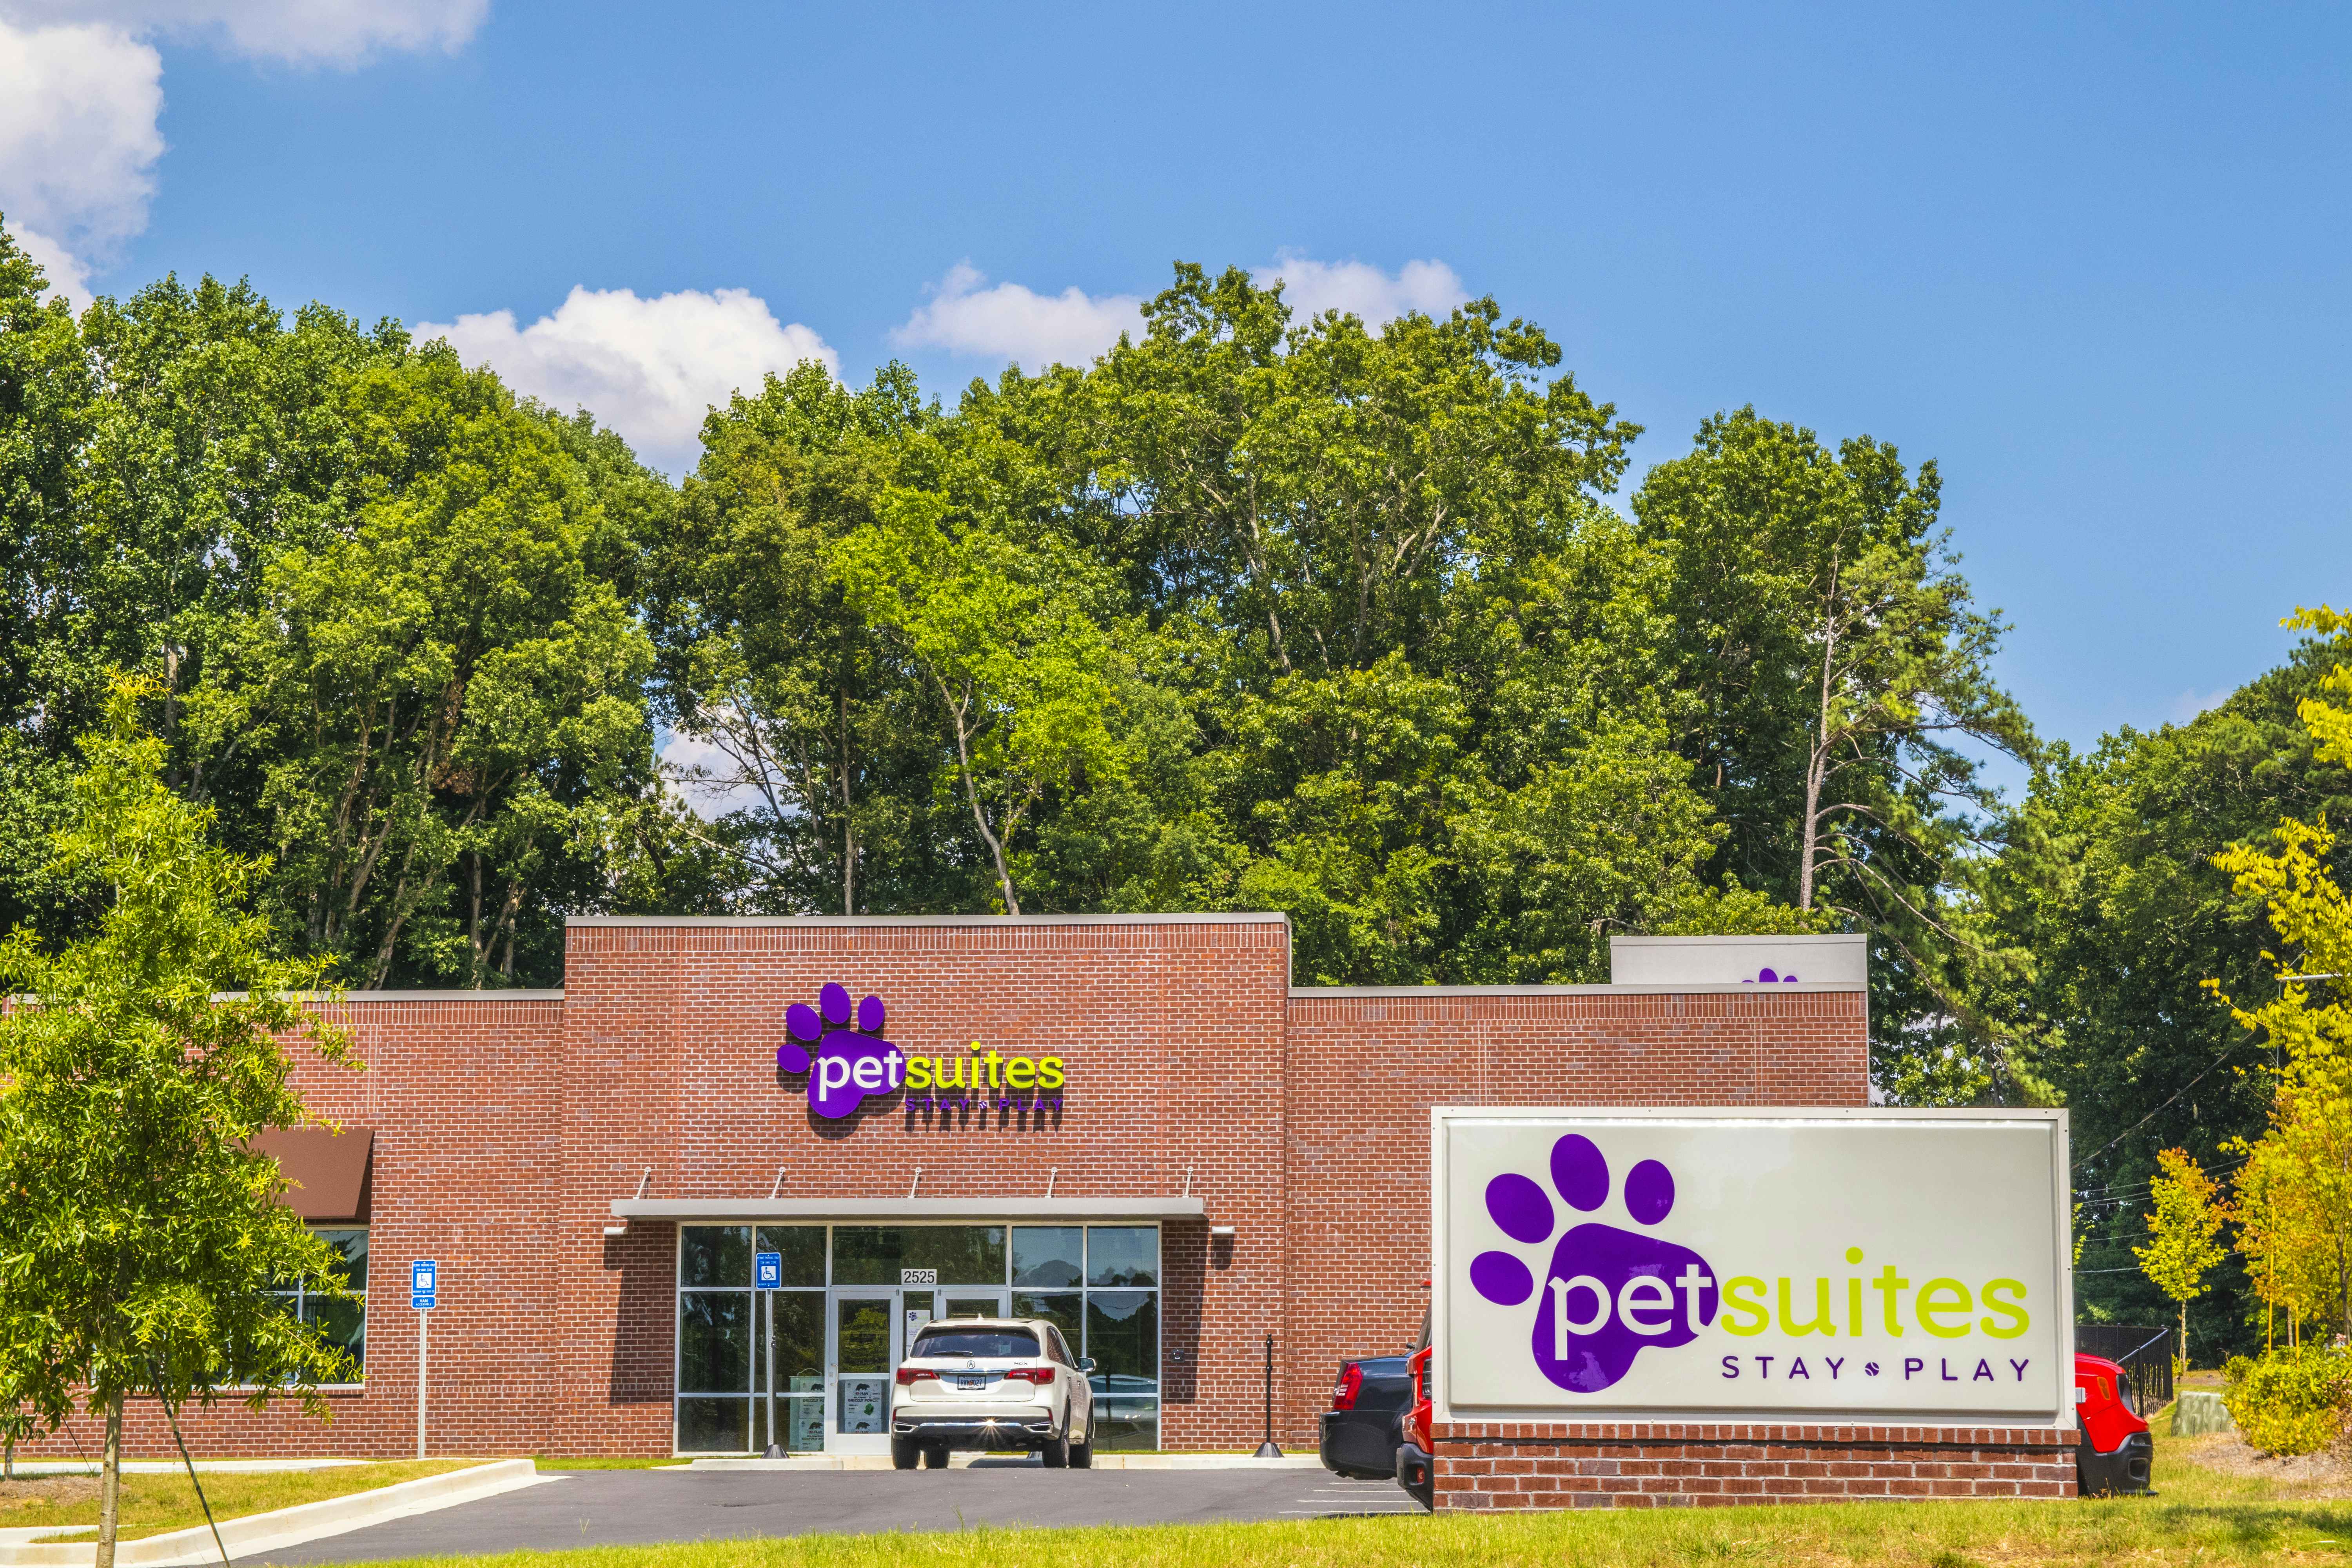 front entrance view of a PetSuites pet boarding facility with road sign